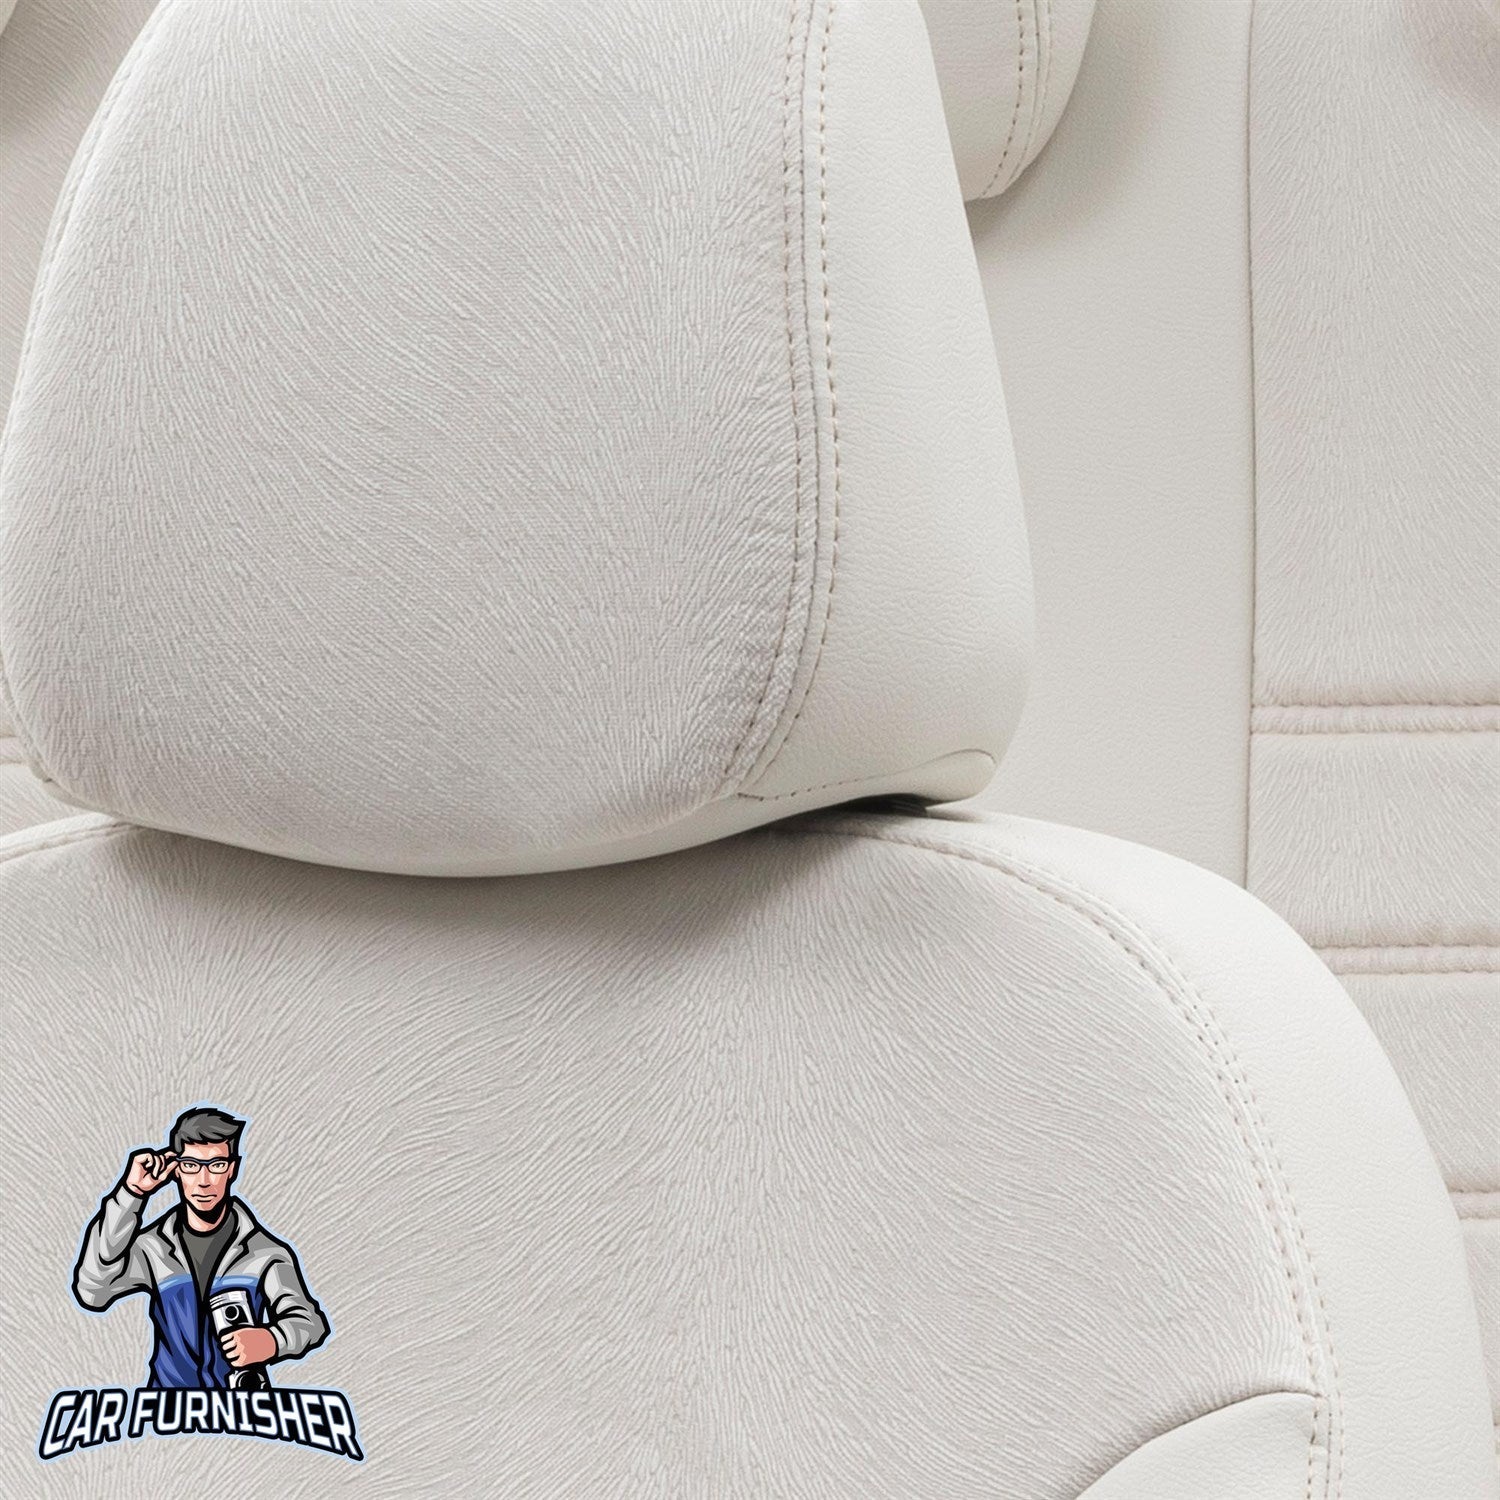 Isuzu N-Wide Seat Covers London Foal Feather Design Ivory Leather & Foal Feather